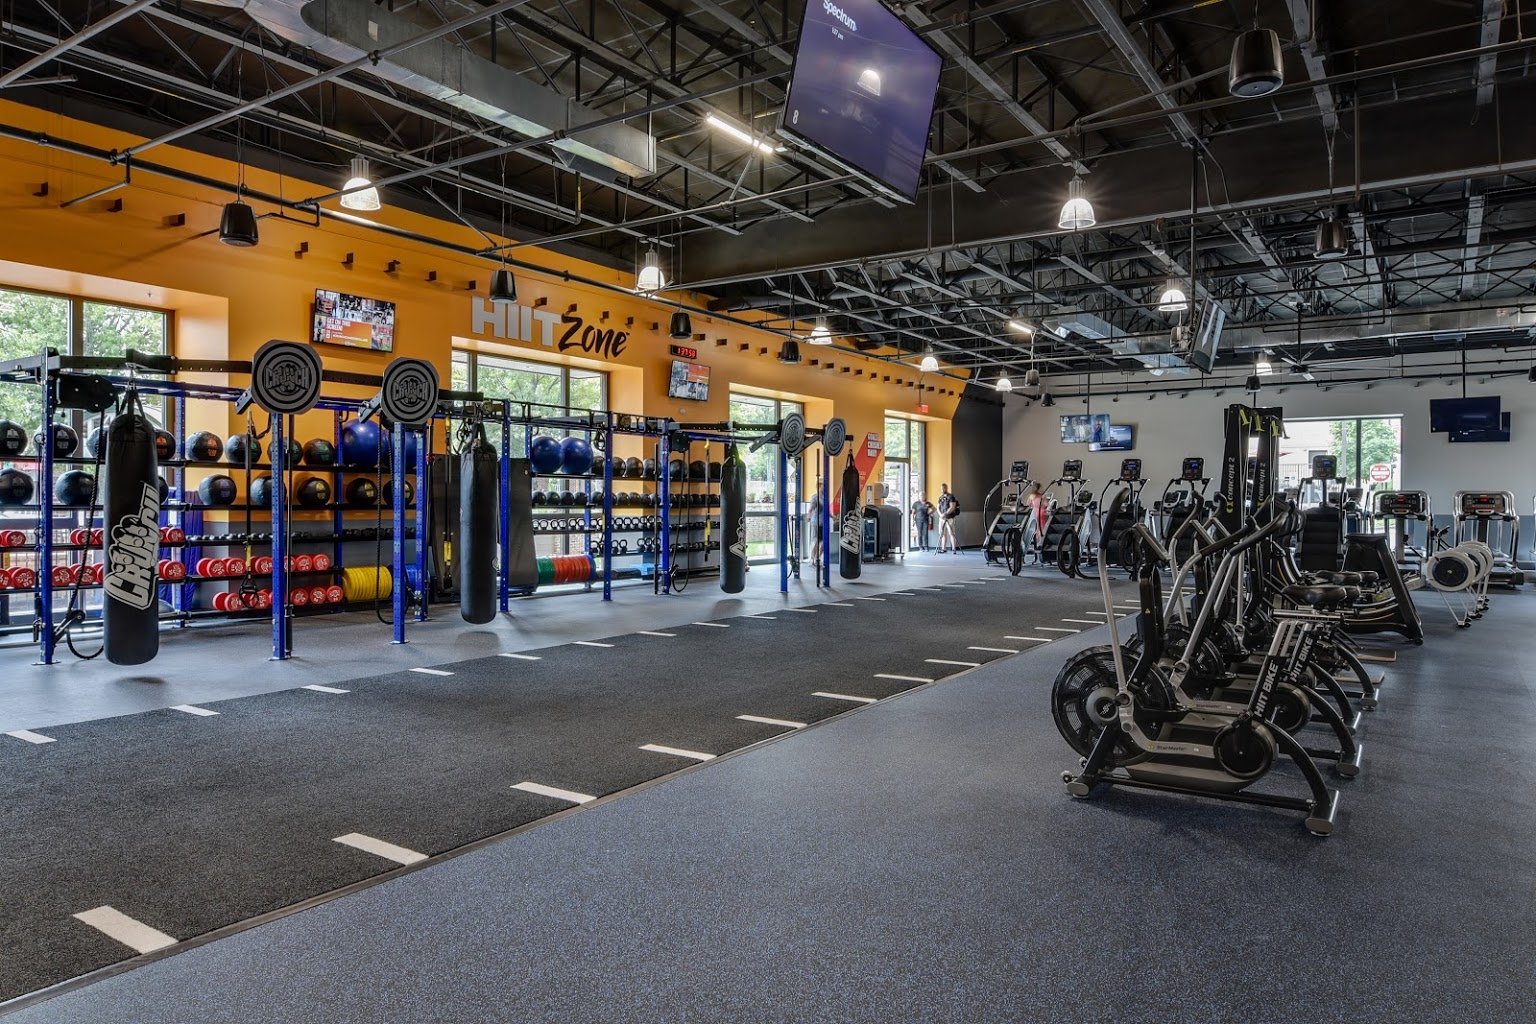 hit zone at Crunch Fitness fitness gym at Cameron Village in Raleigh, NC